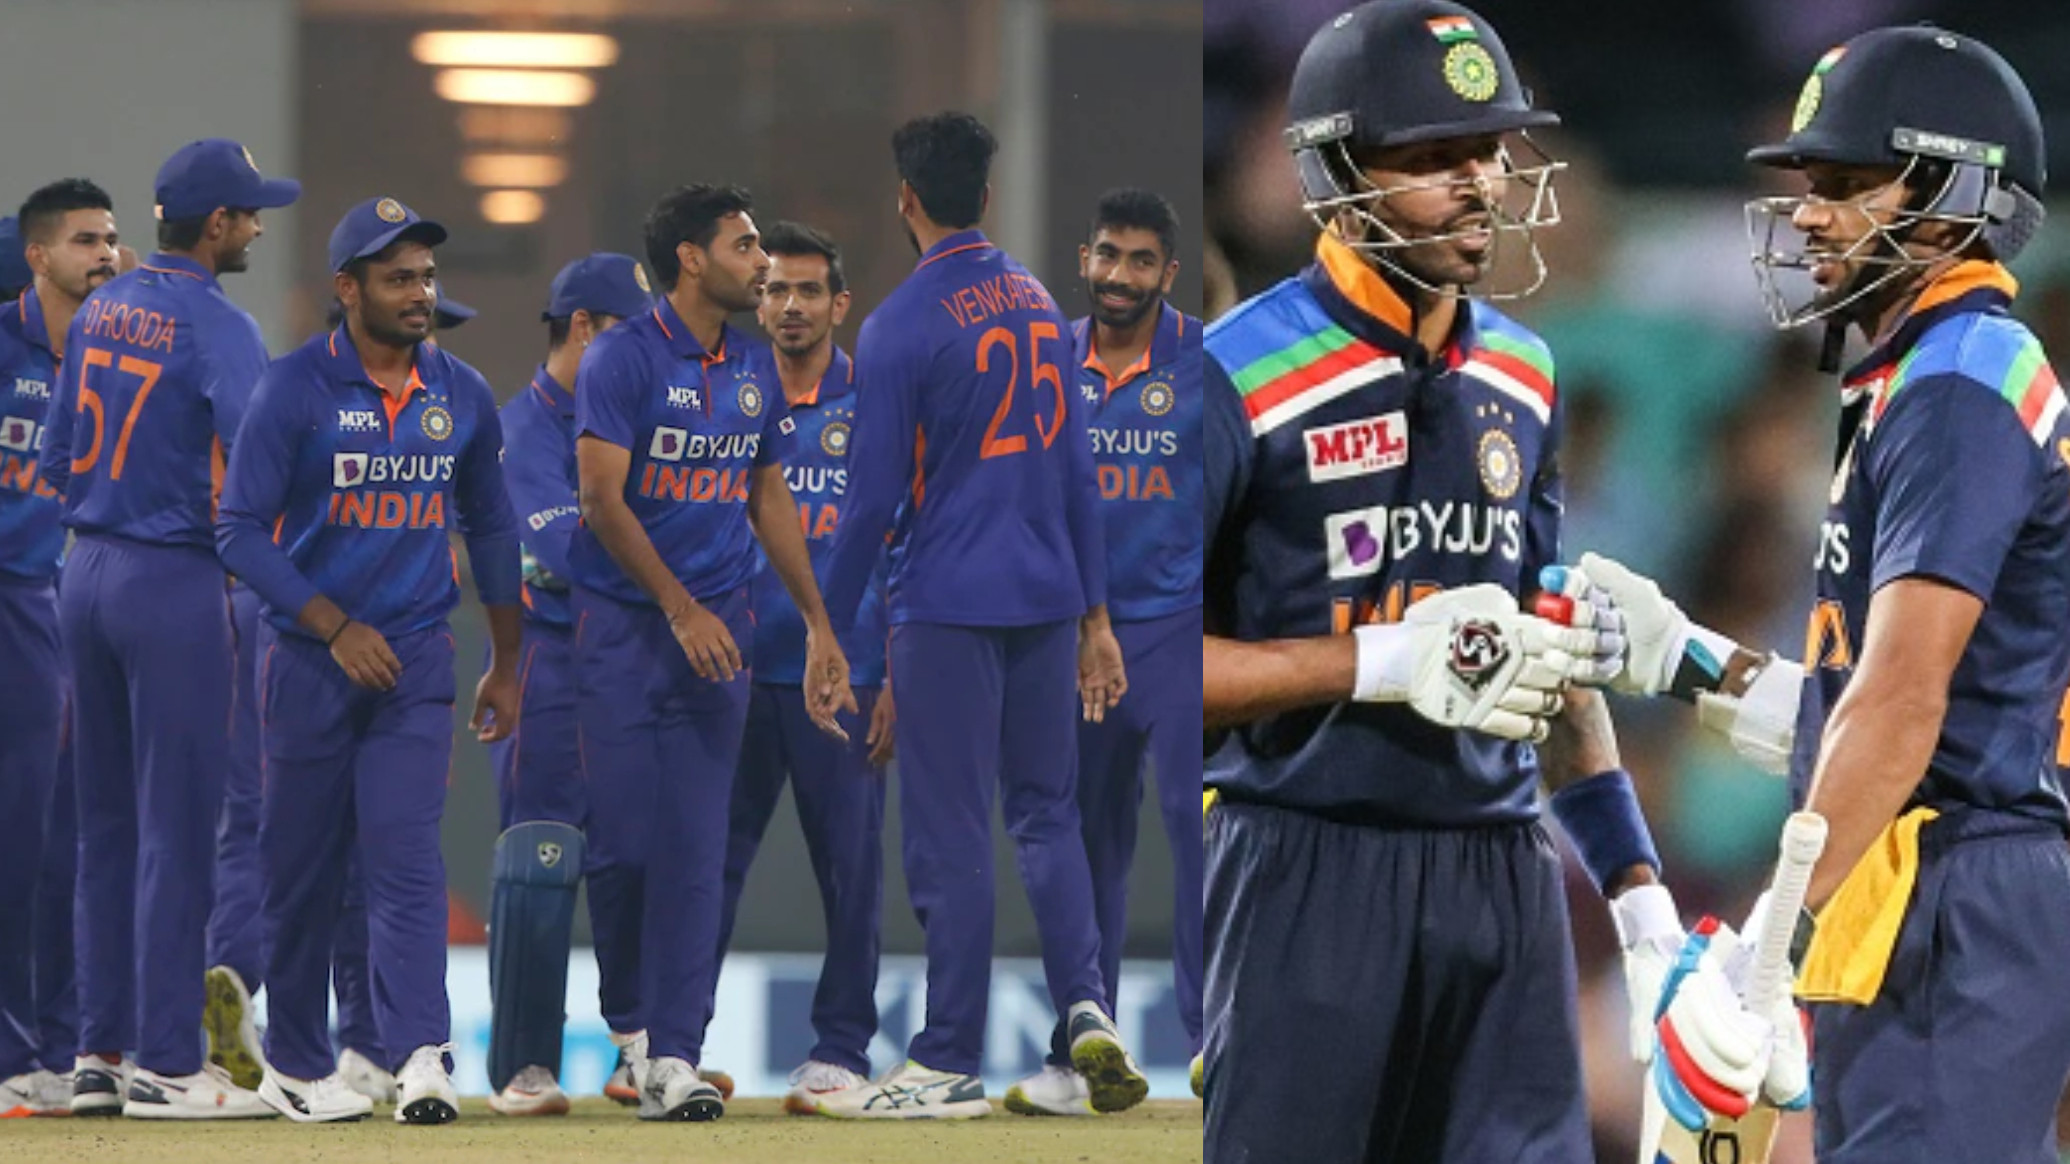 IND v SA 2022: COC Predicted Indian Team squad for the South Africa T20I series